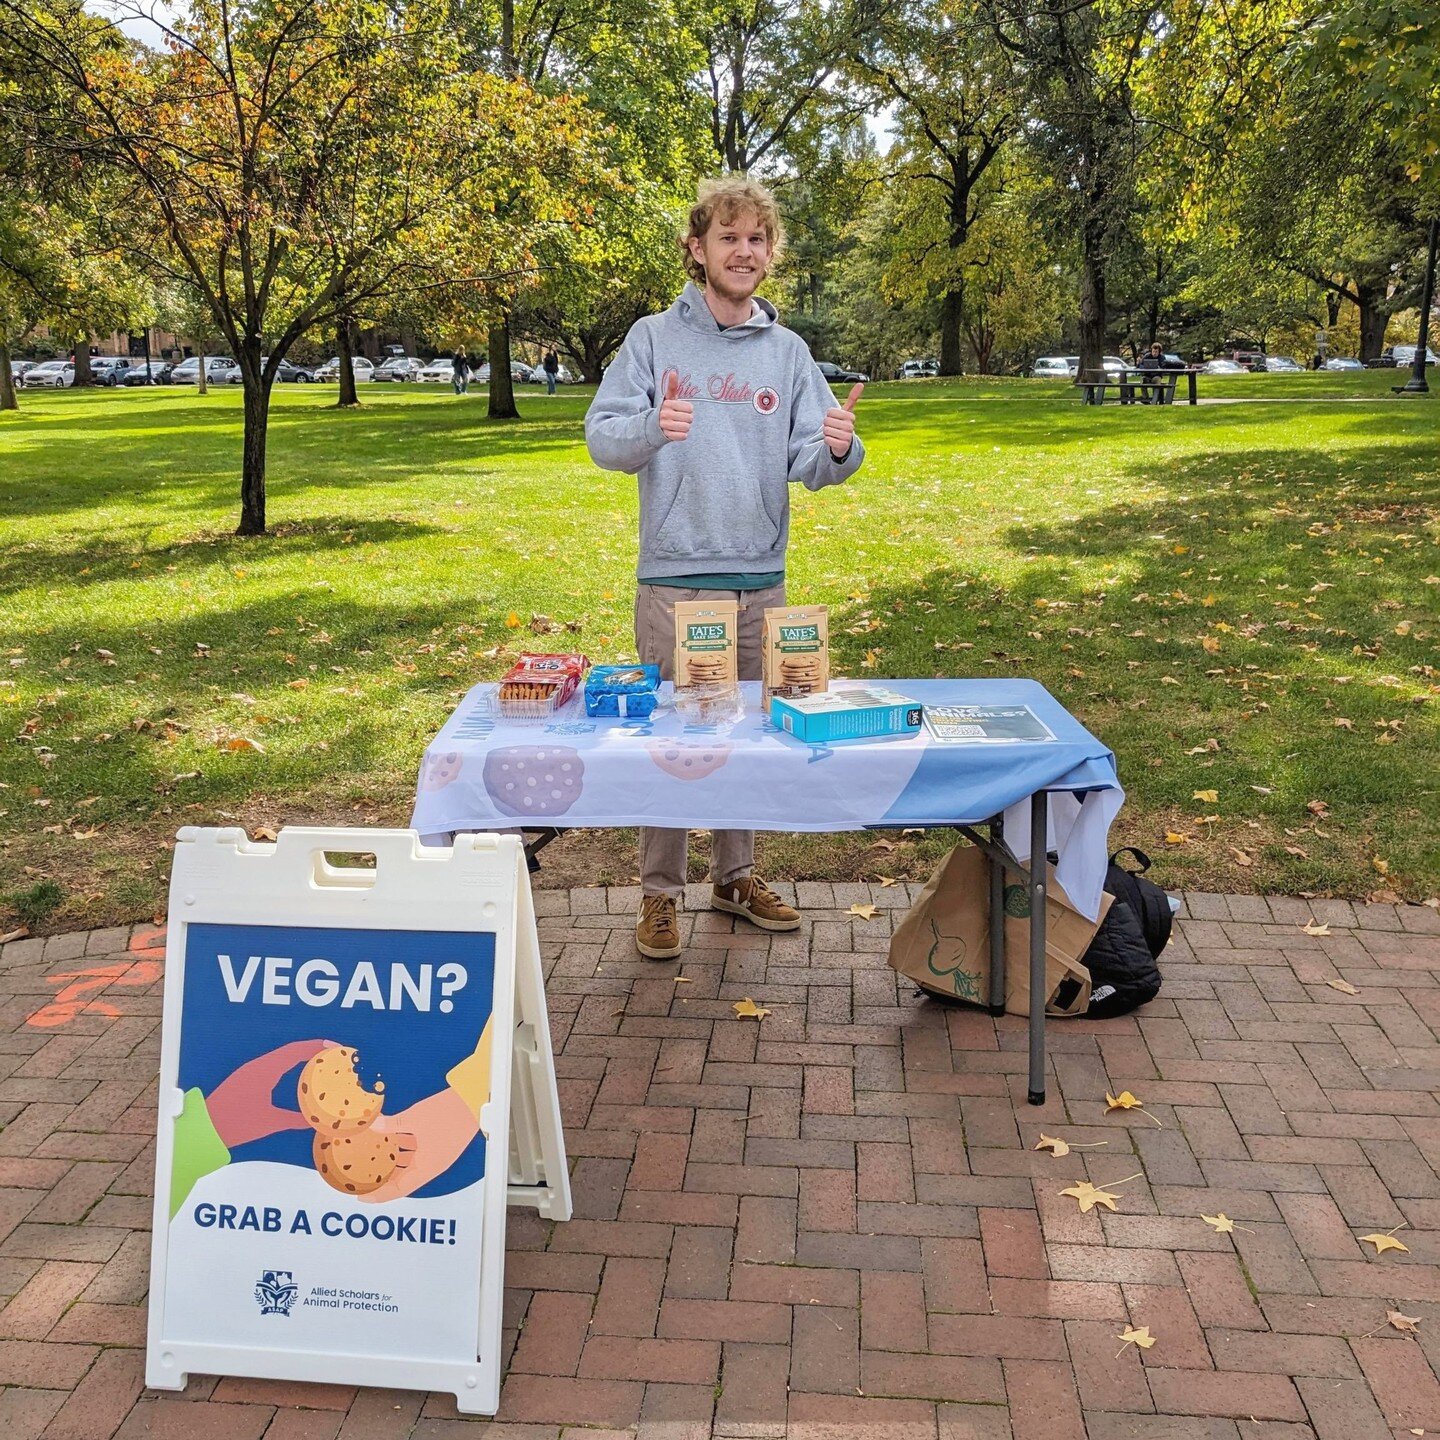 Thanks to all who signed up and engaged at our table in the oval this week! There were lots of great conversations and we hope to see you guys at more of our events! ❤️🐄🌱